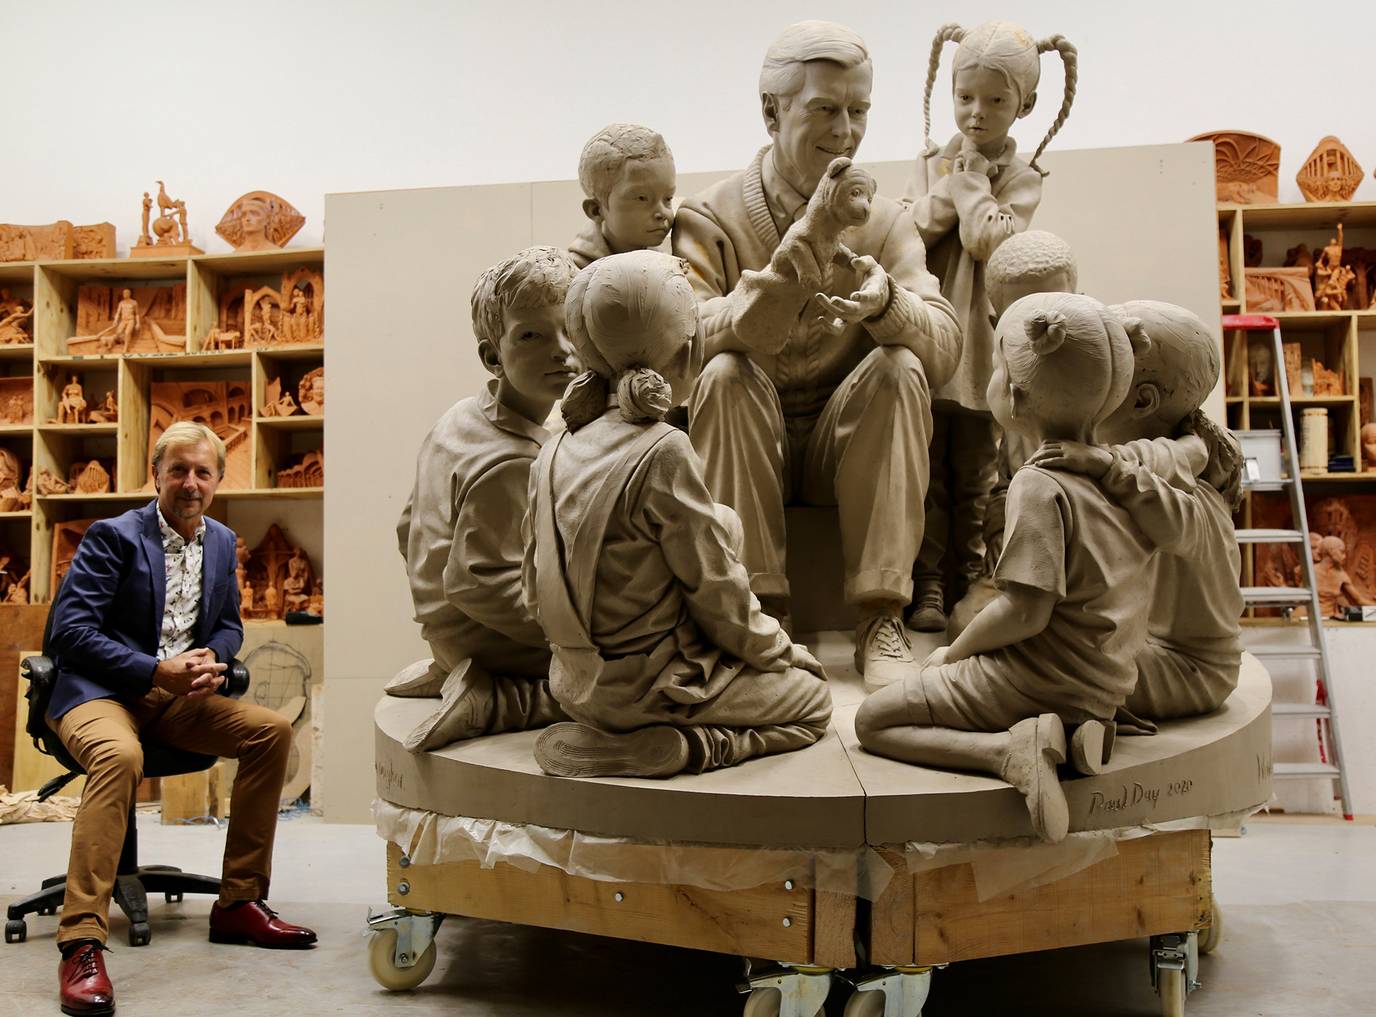 Artist Paul Day pictured next to the sculpture he’s creating of Mister Rogers for Rollins College.